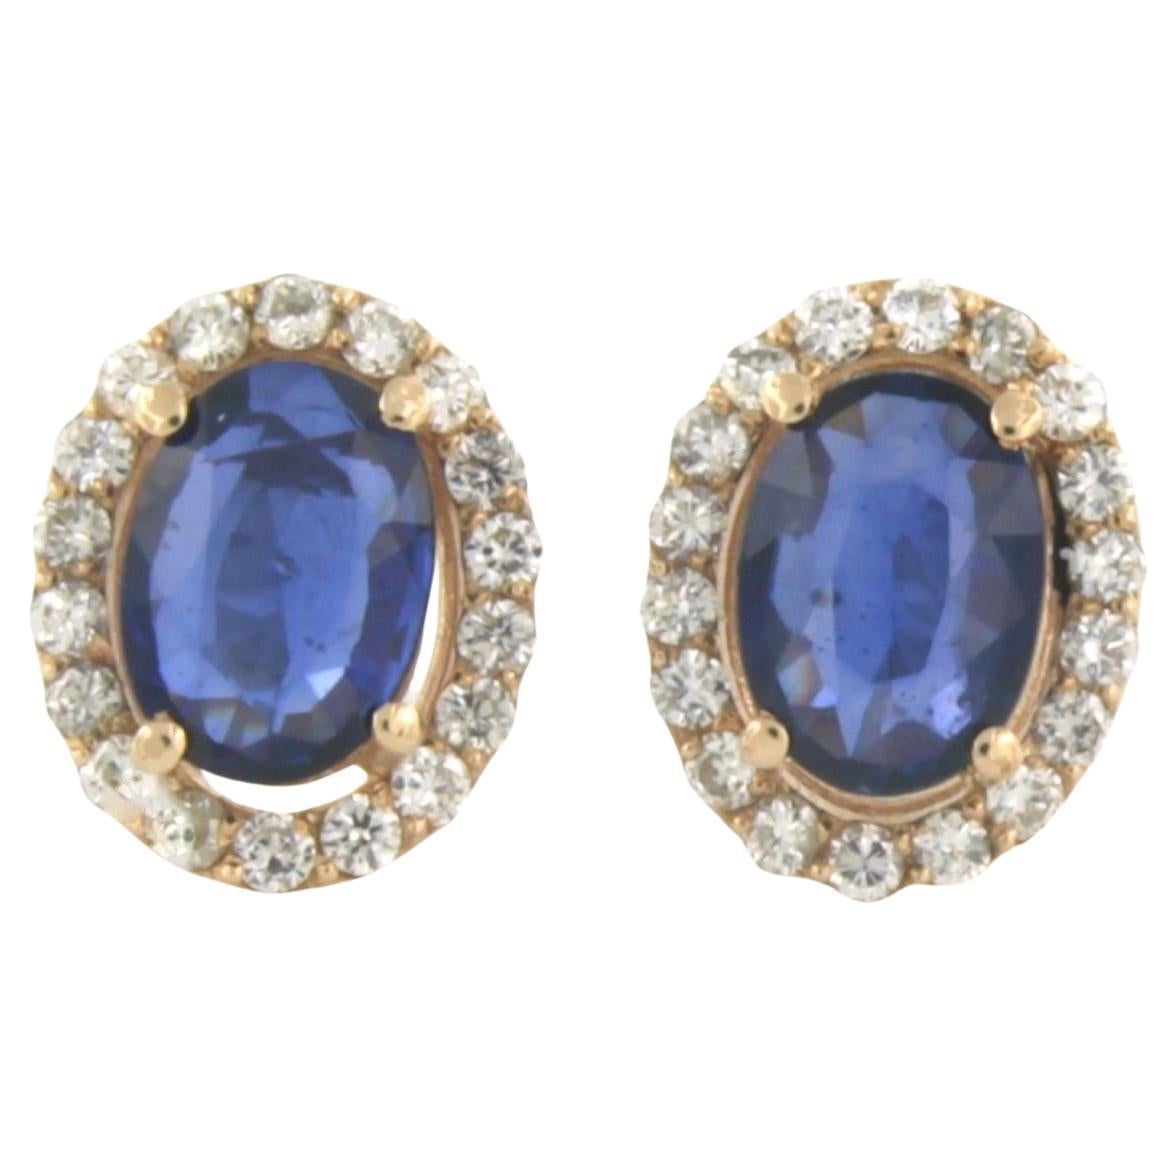 Earrings set with Sapphire and diamonds 14k pink gold